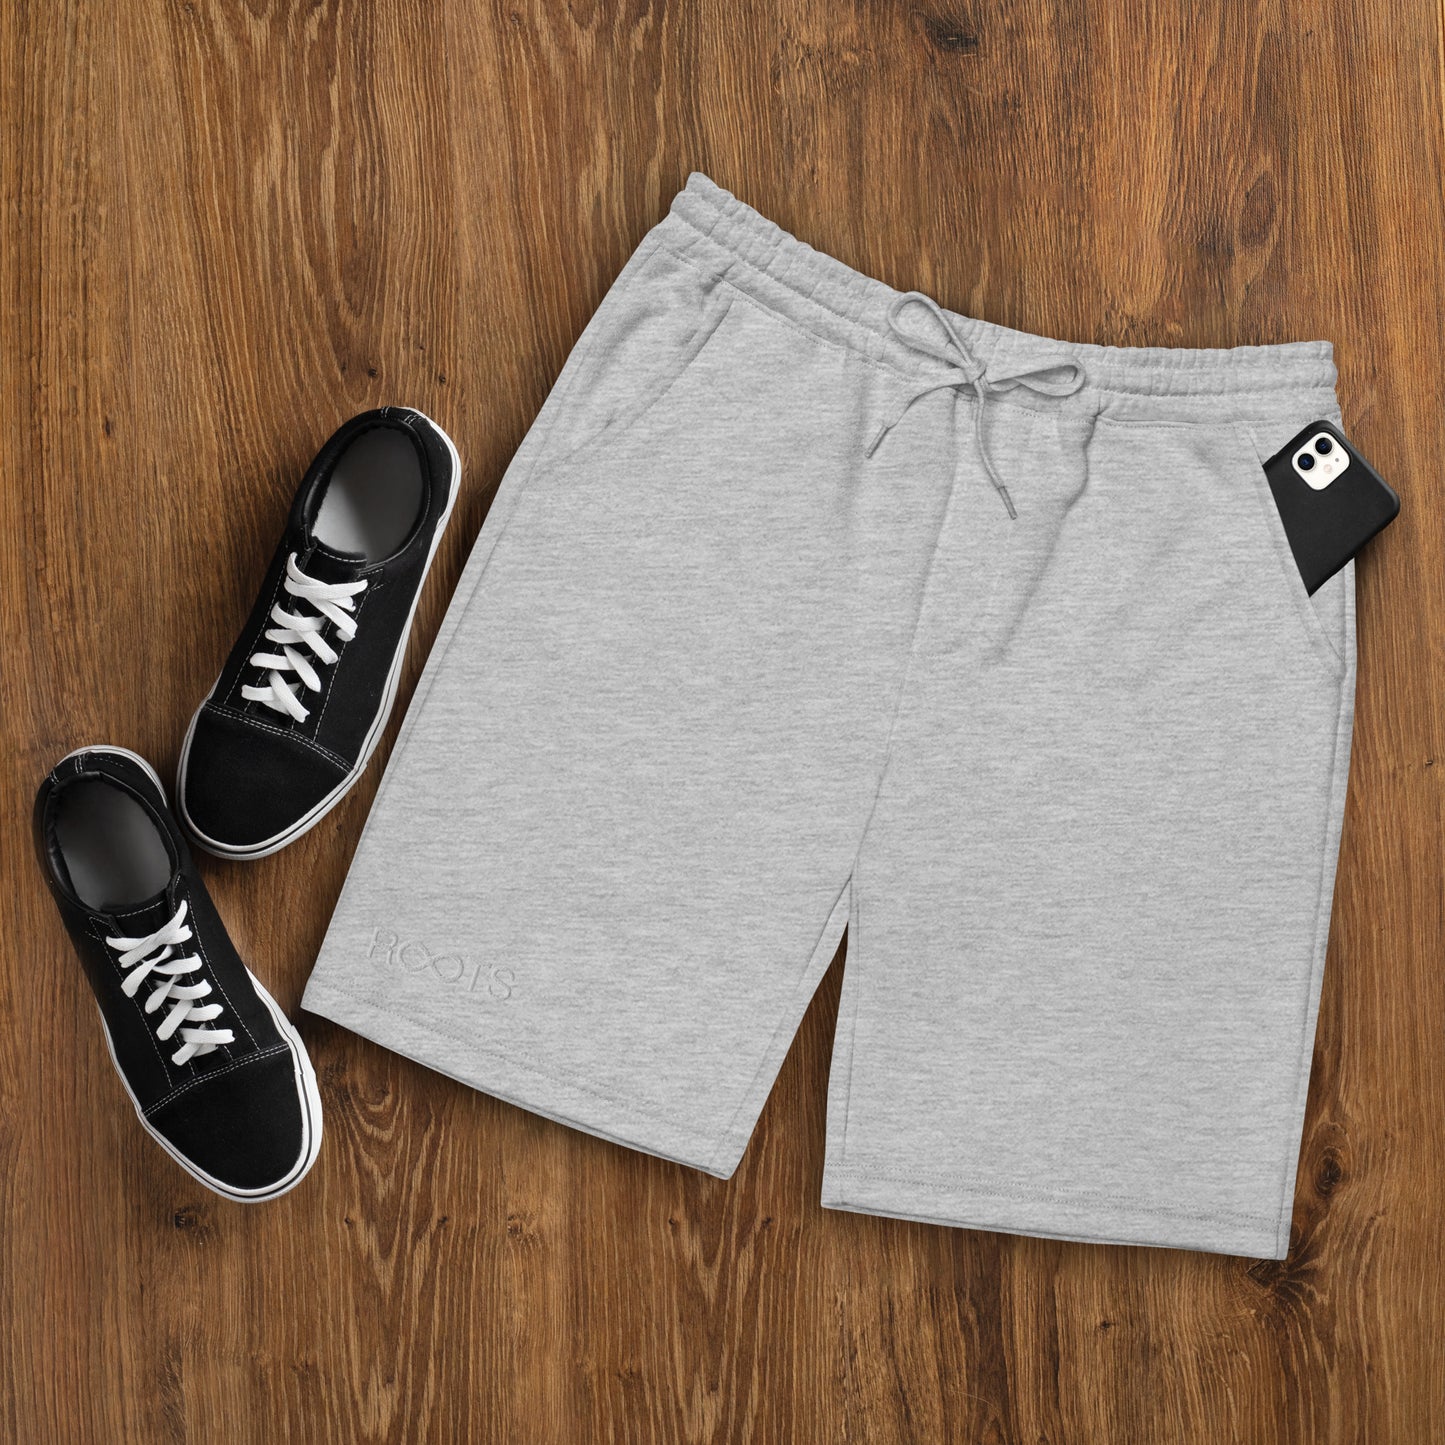 Roots Are Forever Men's fleece shorts